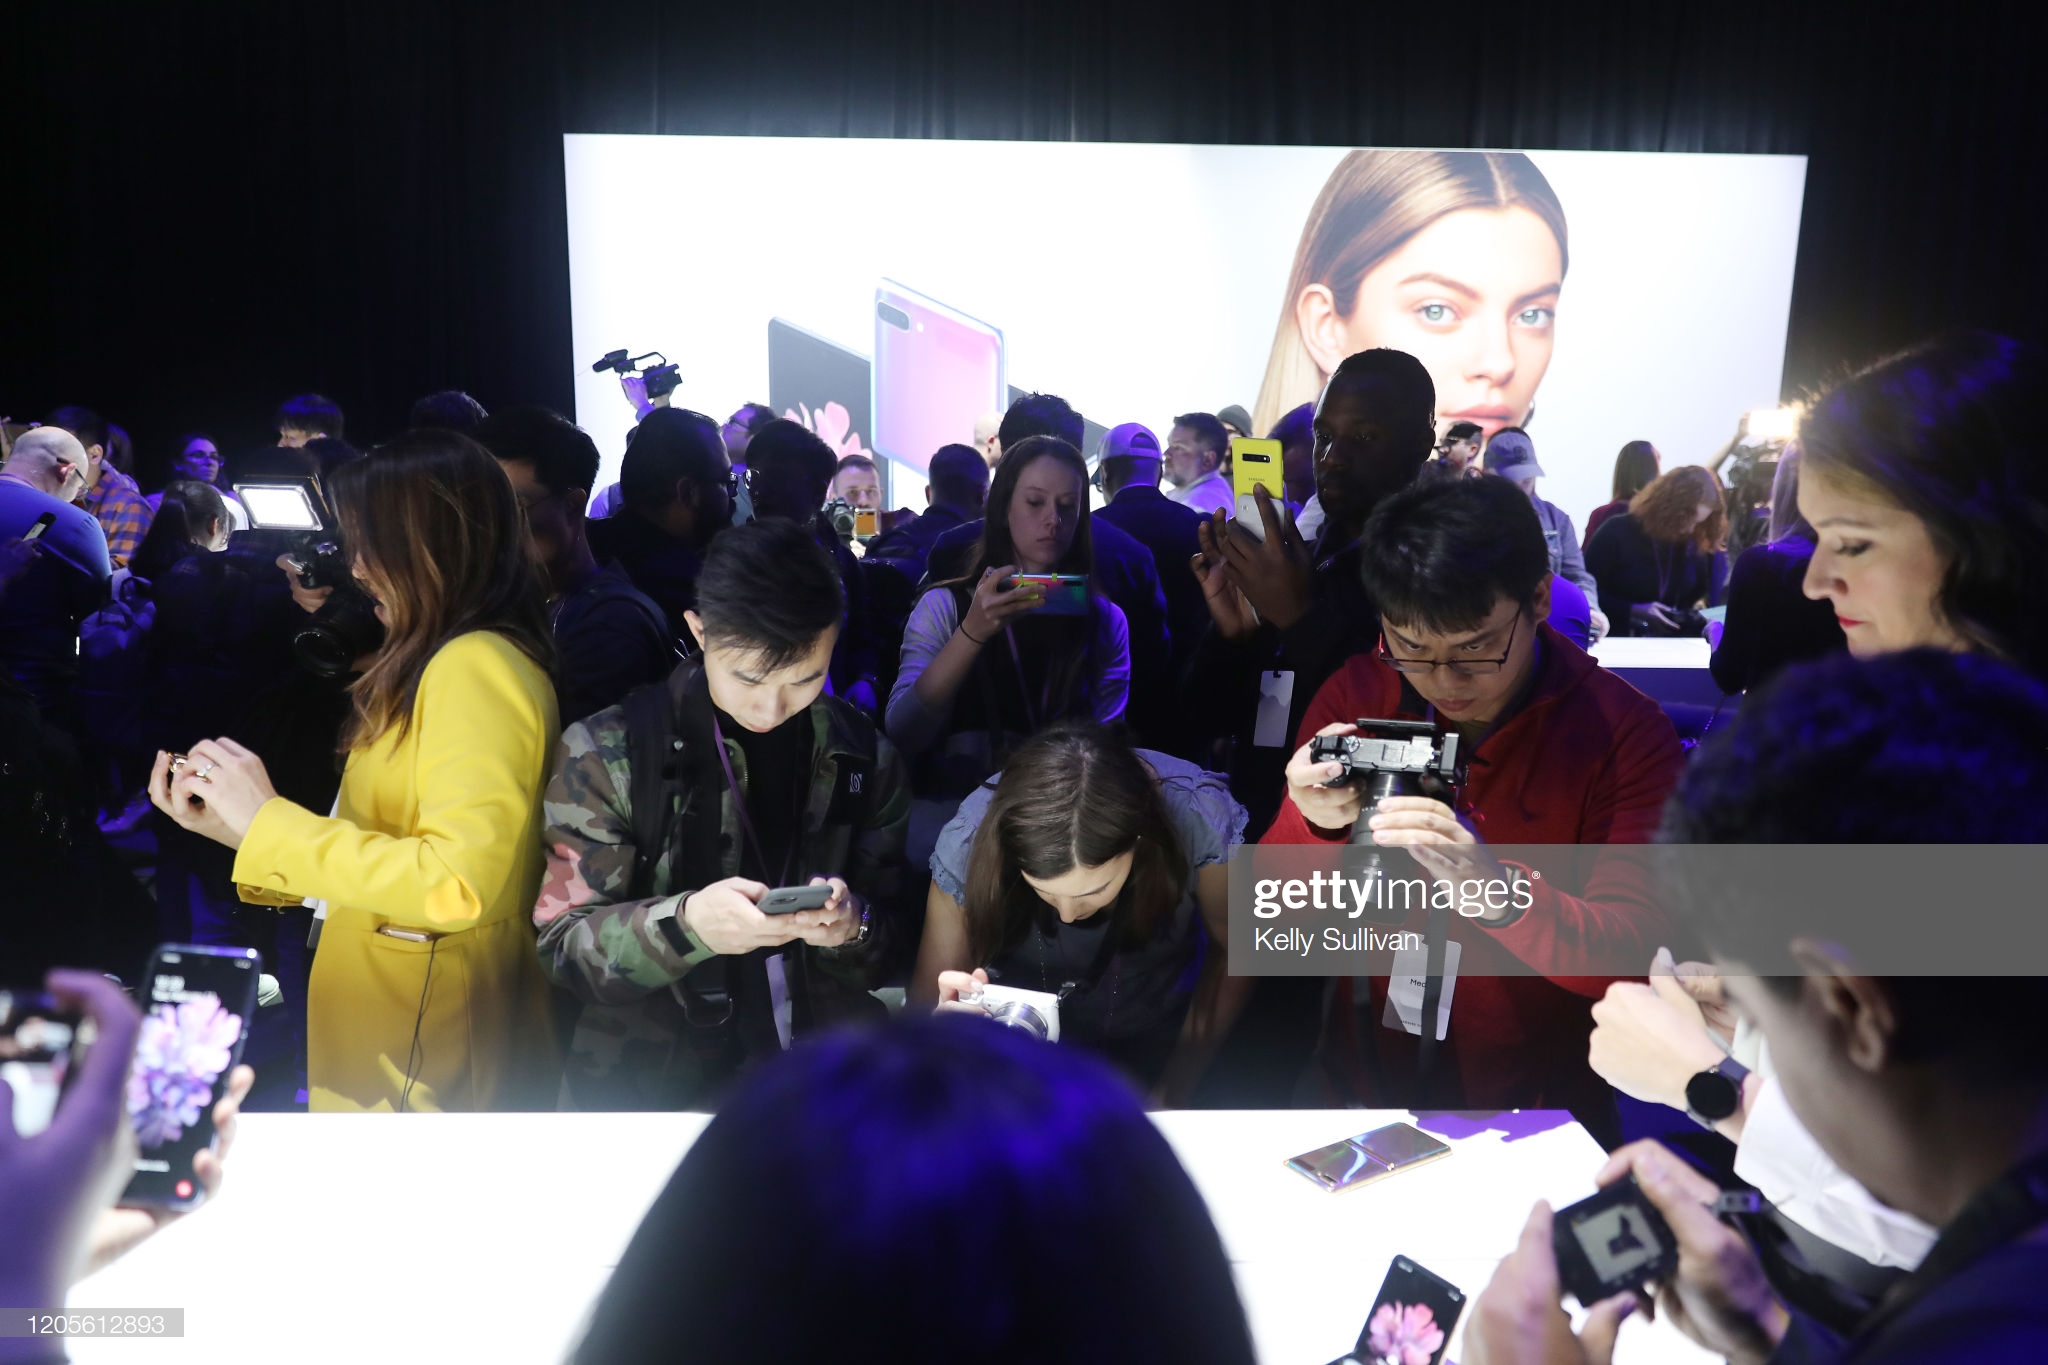 gettyimages-1205612893-2048x2048.jpg